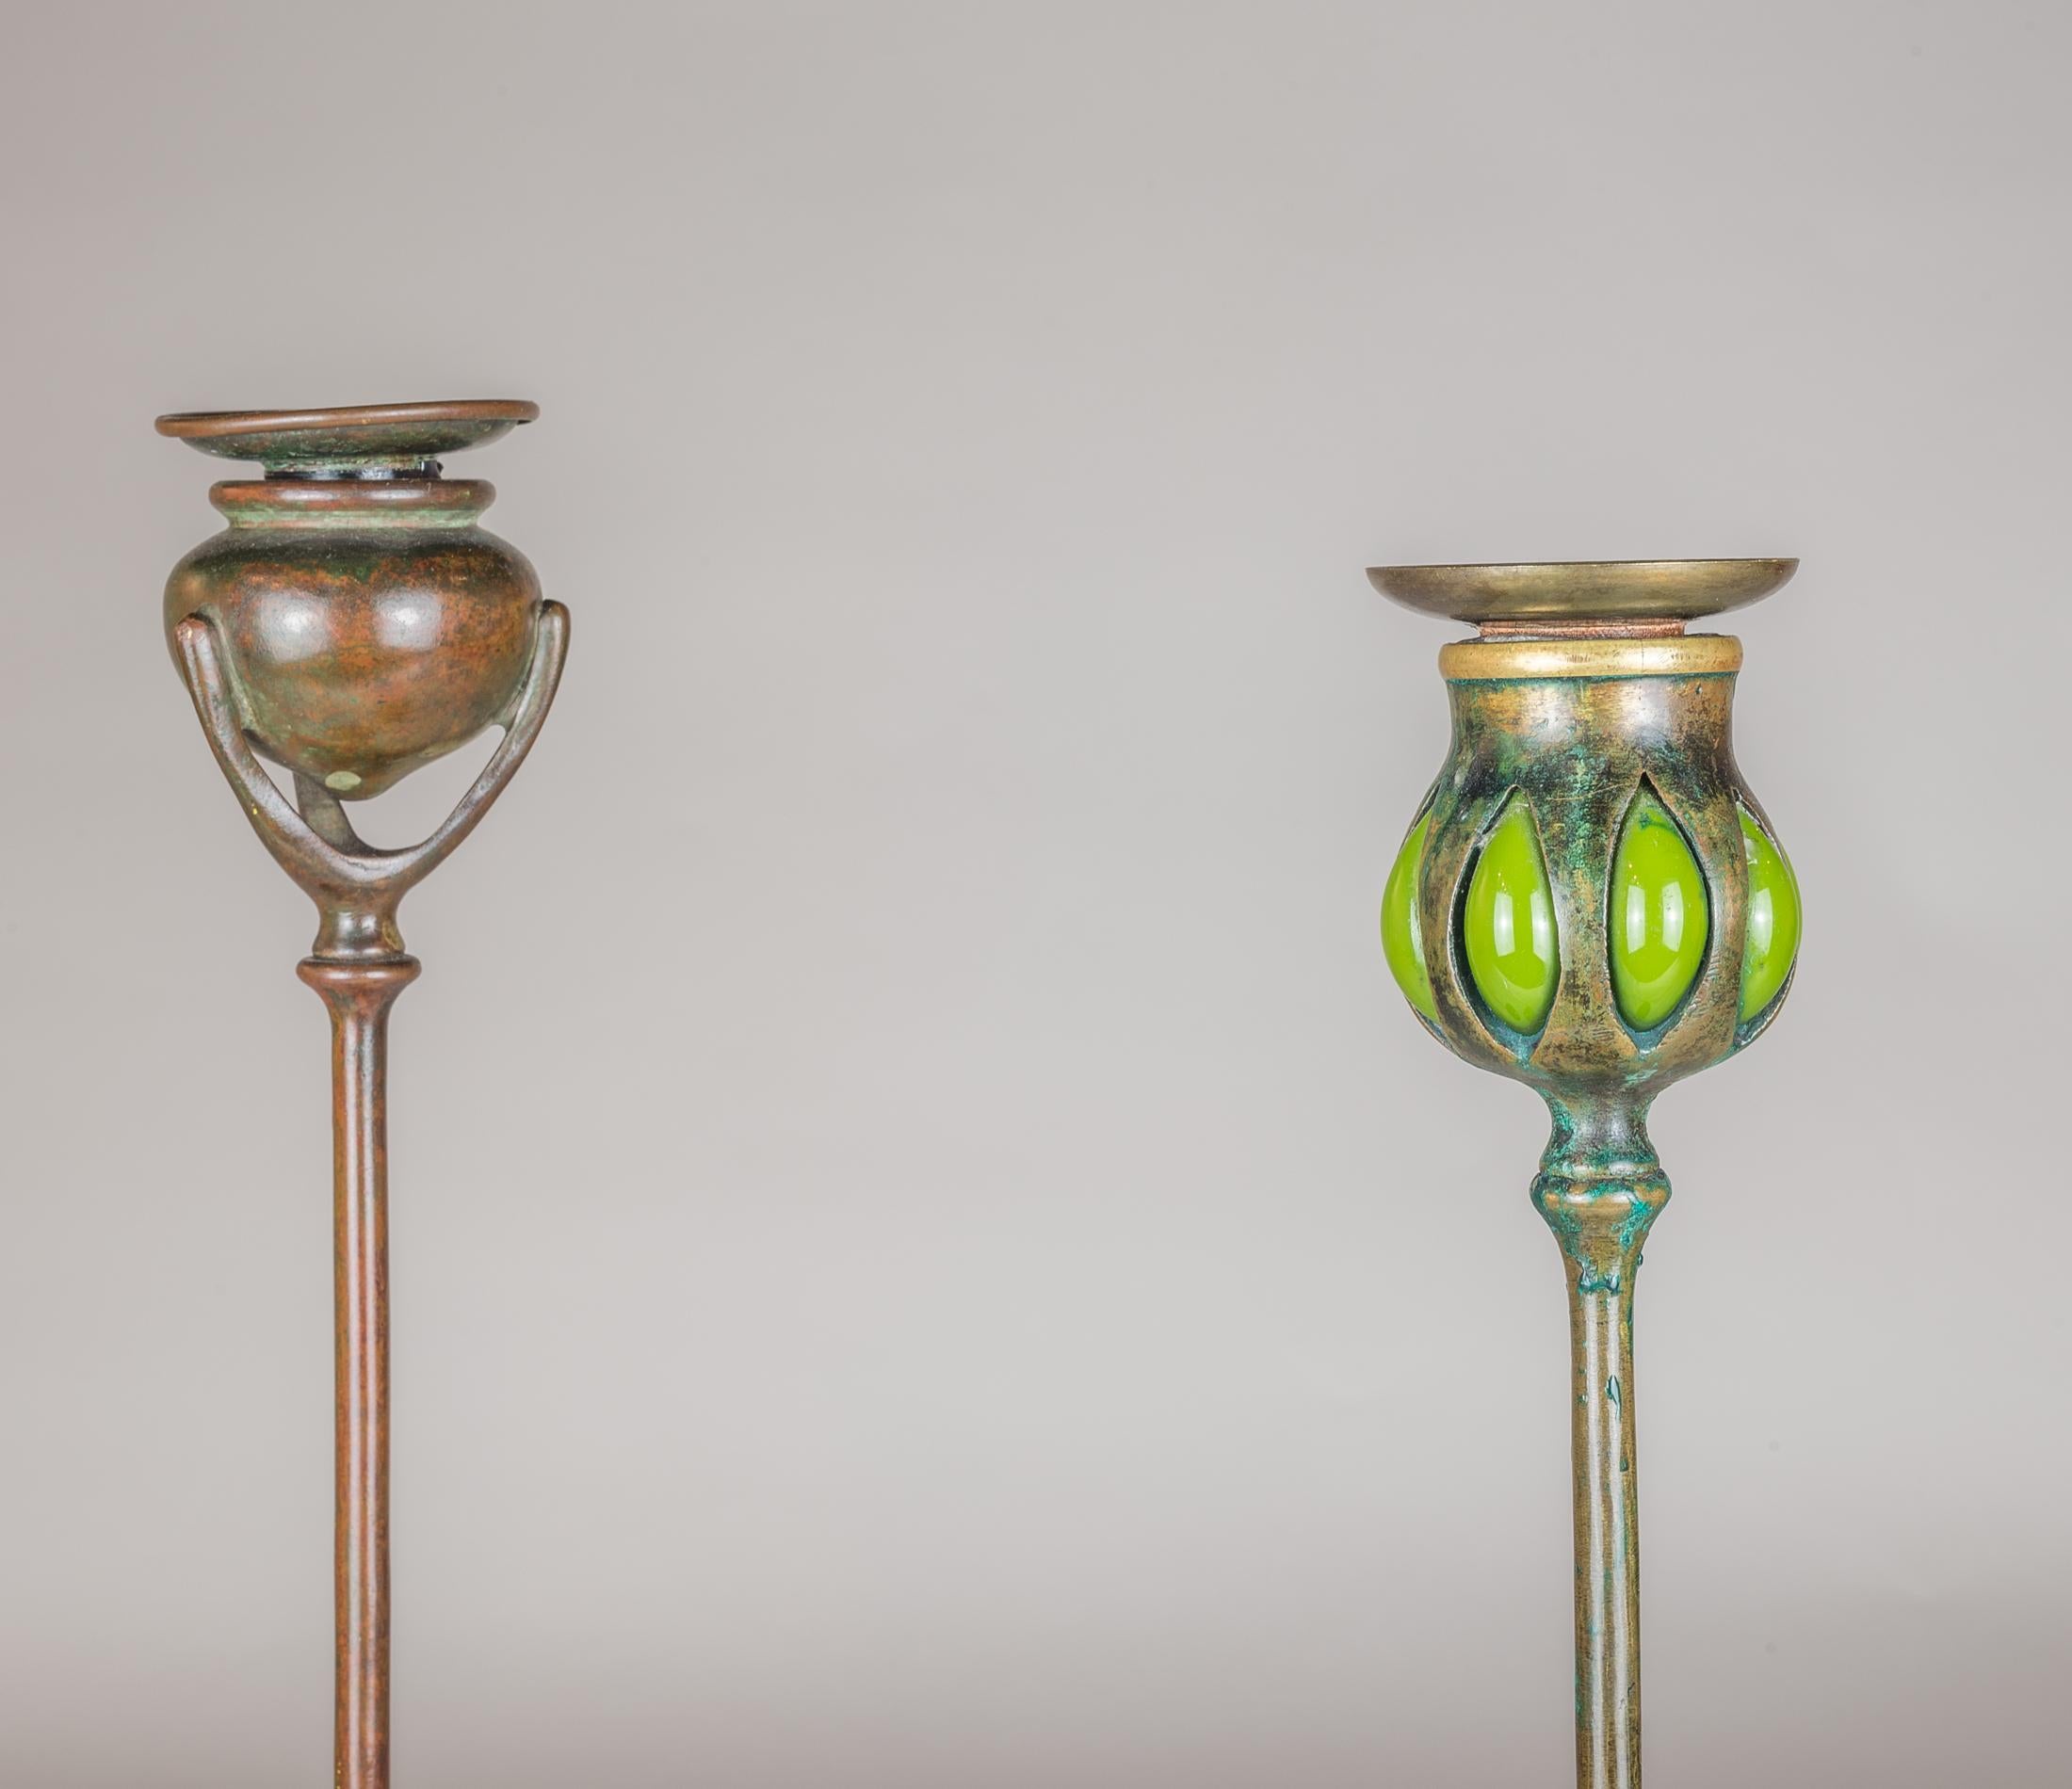 Two American patinated-bronze art nouveau candlesticks by Tiffany Studios in New York. One stamped 1213, the other mounted with green glass to look like a budding flower about to burst, stamped ‘Tiffany Glass and Decorating Co. monogram and D419.